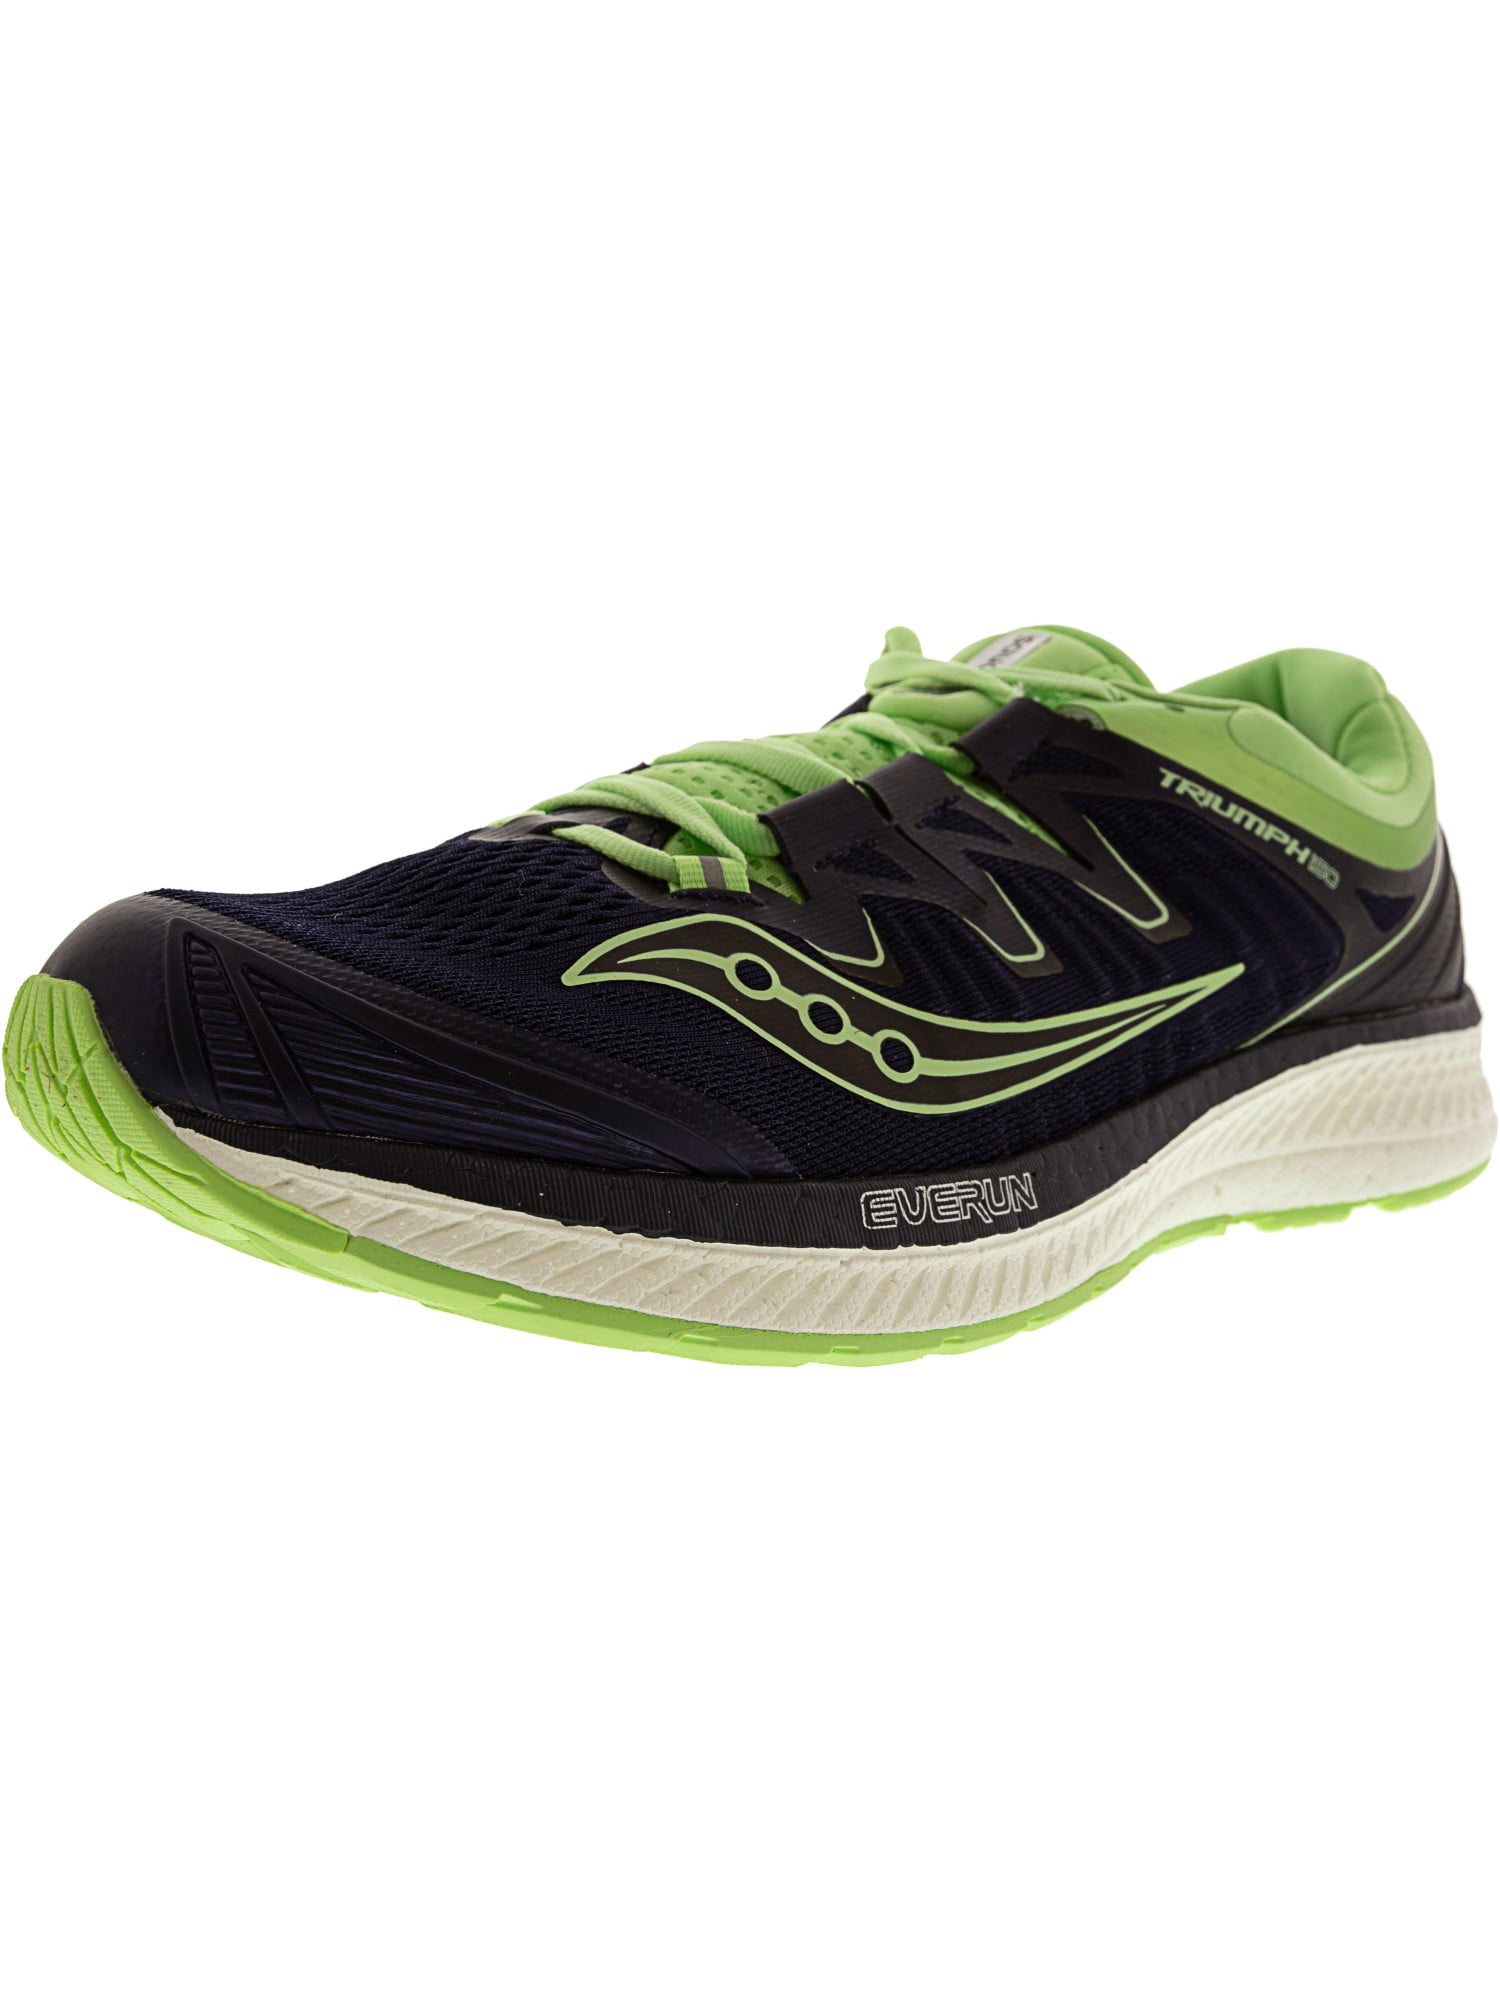 saucony women's triumph iso 4 running shoes